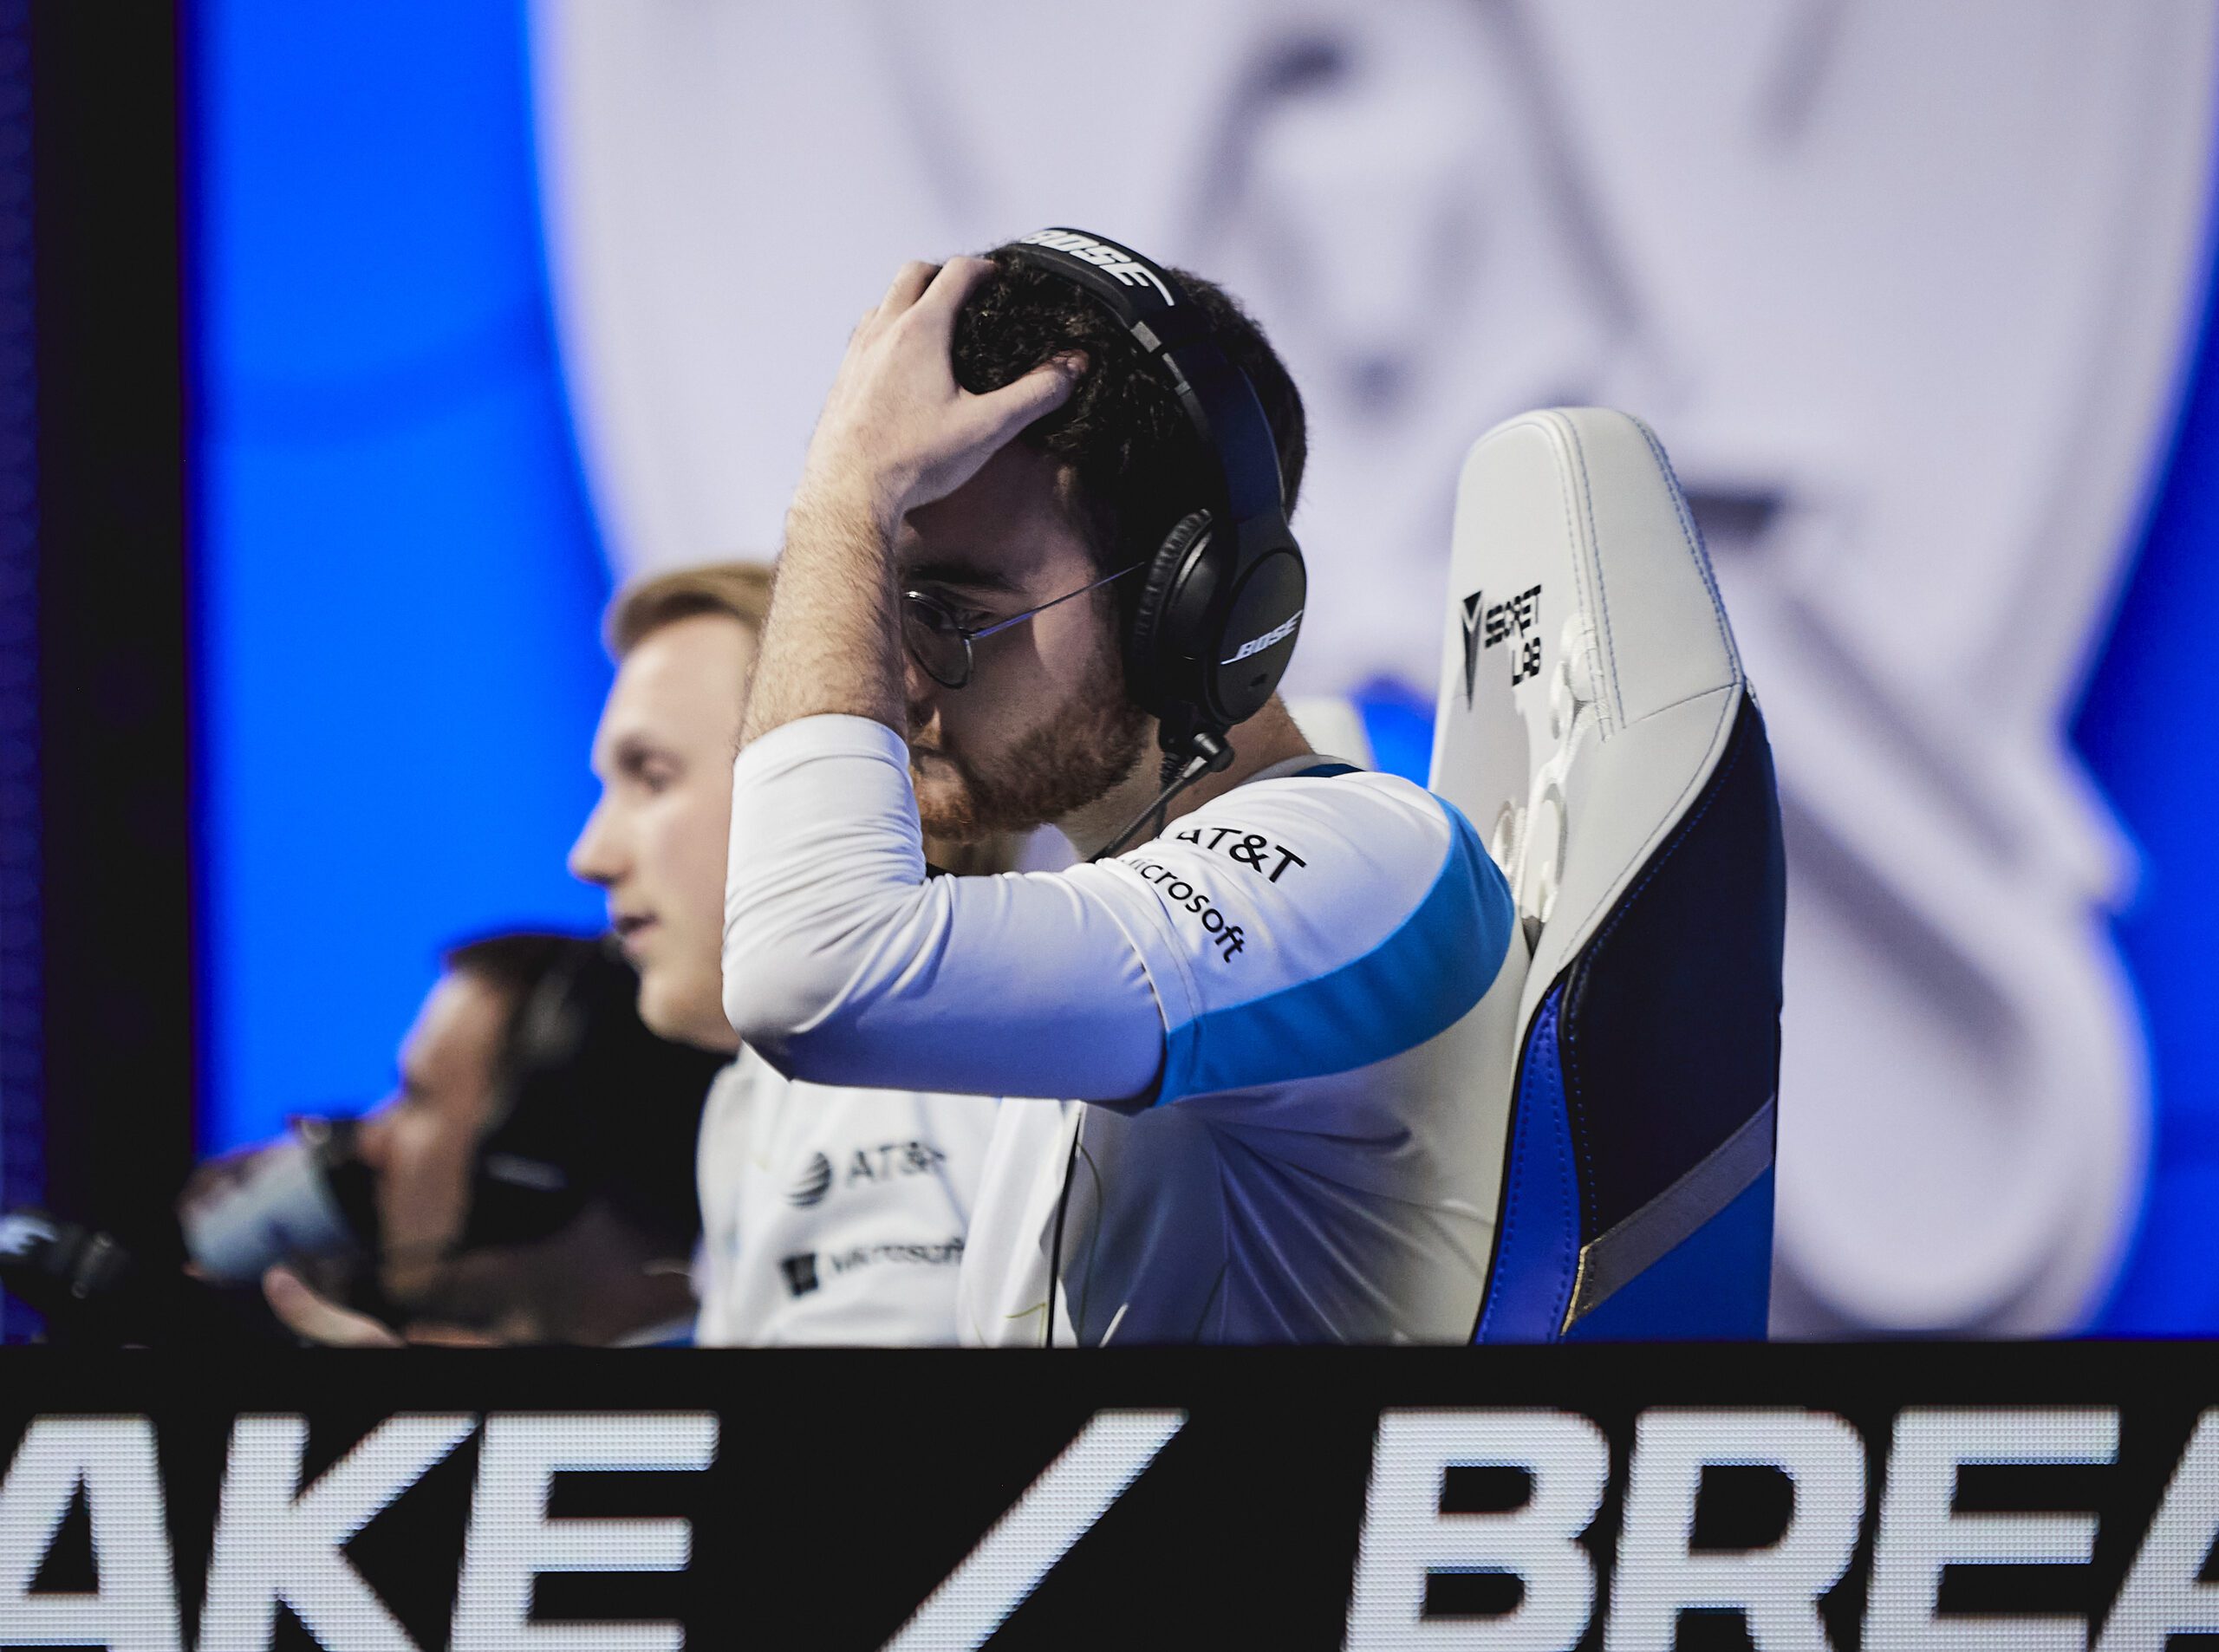 C9 Vulcan grabs his head at Worlds 2021